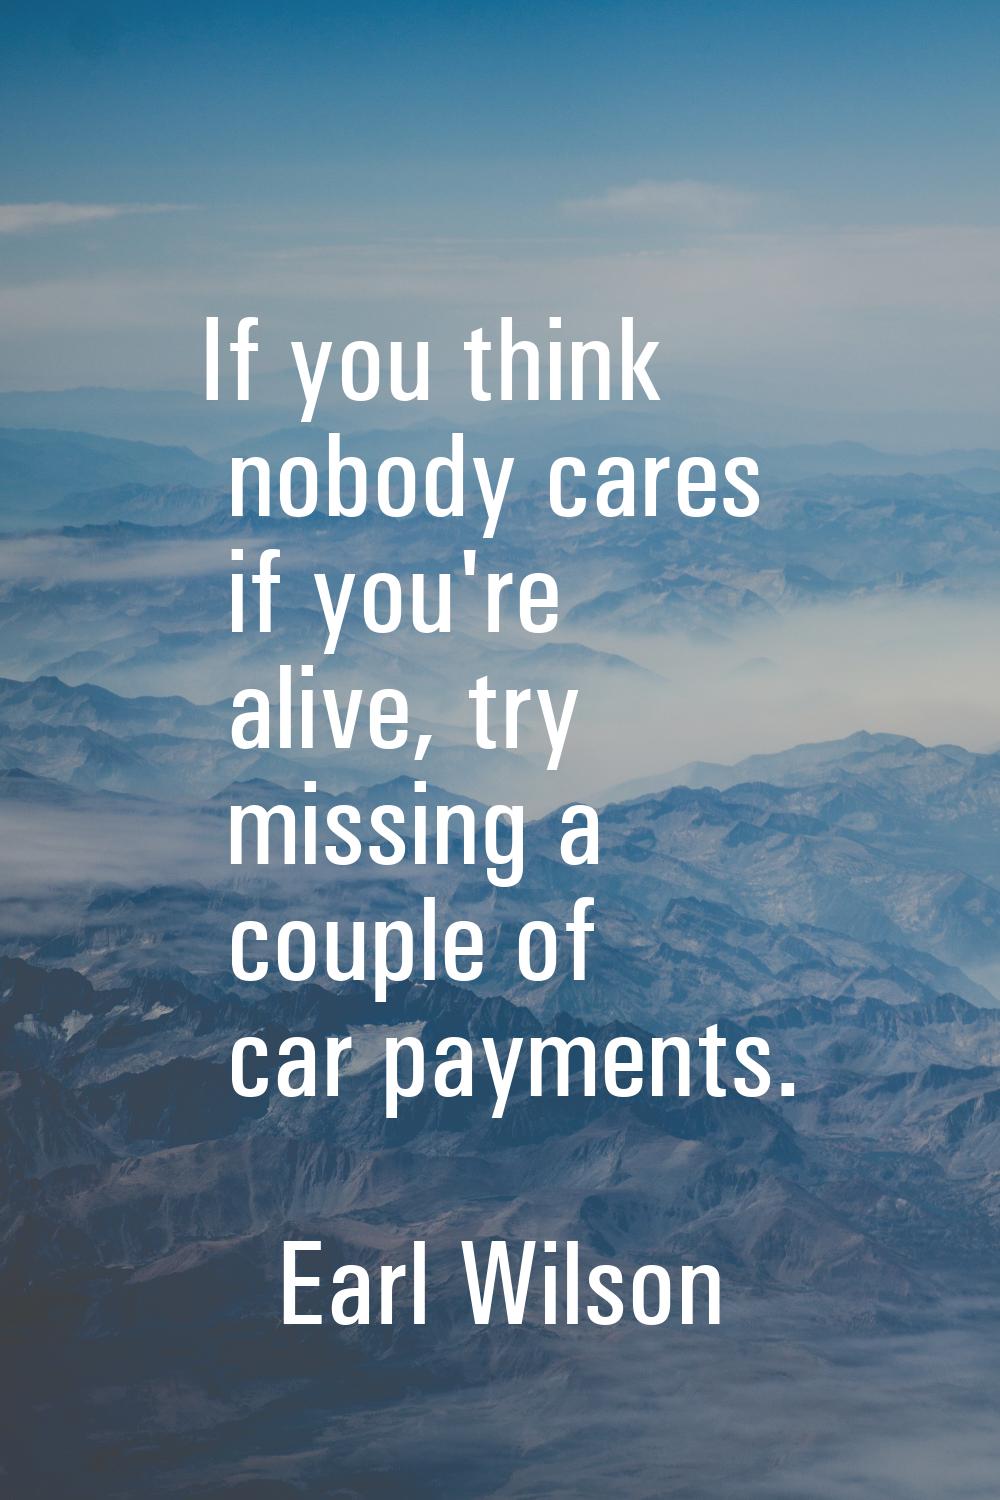 If you think nobody cares if you're alive, try missing a couple of car payments.